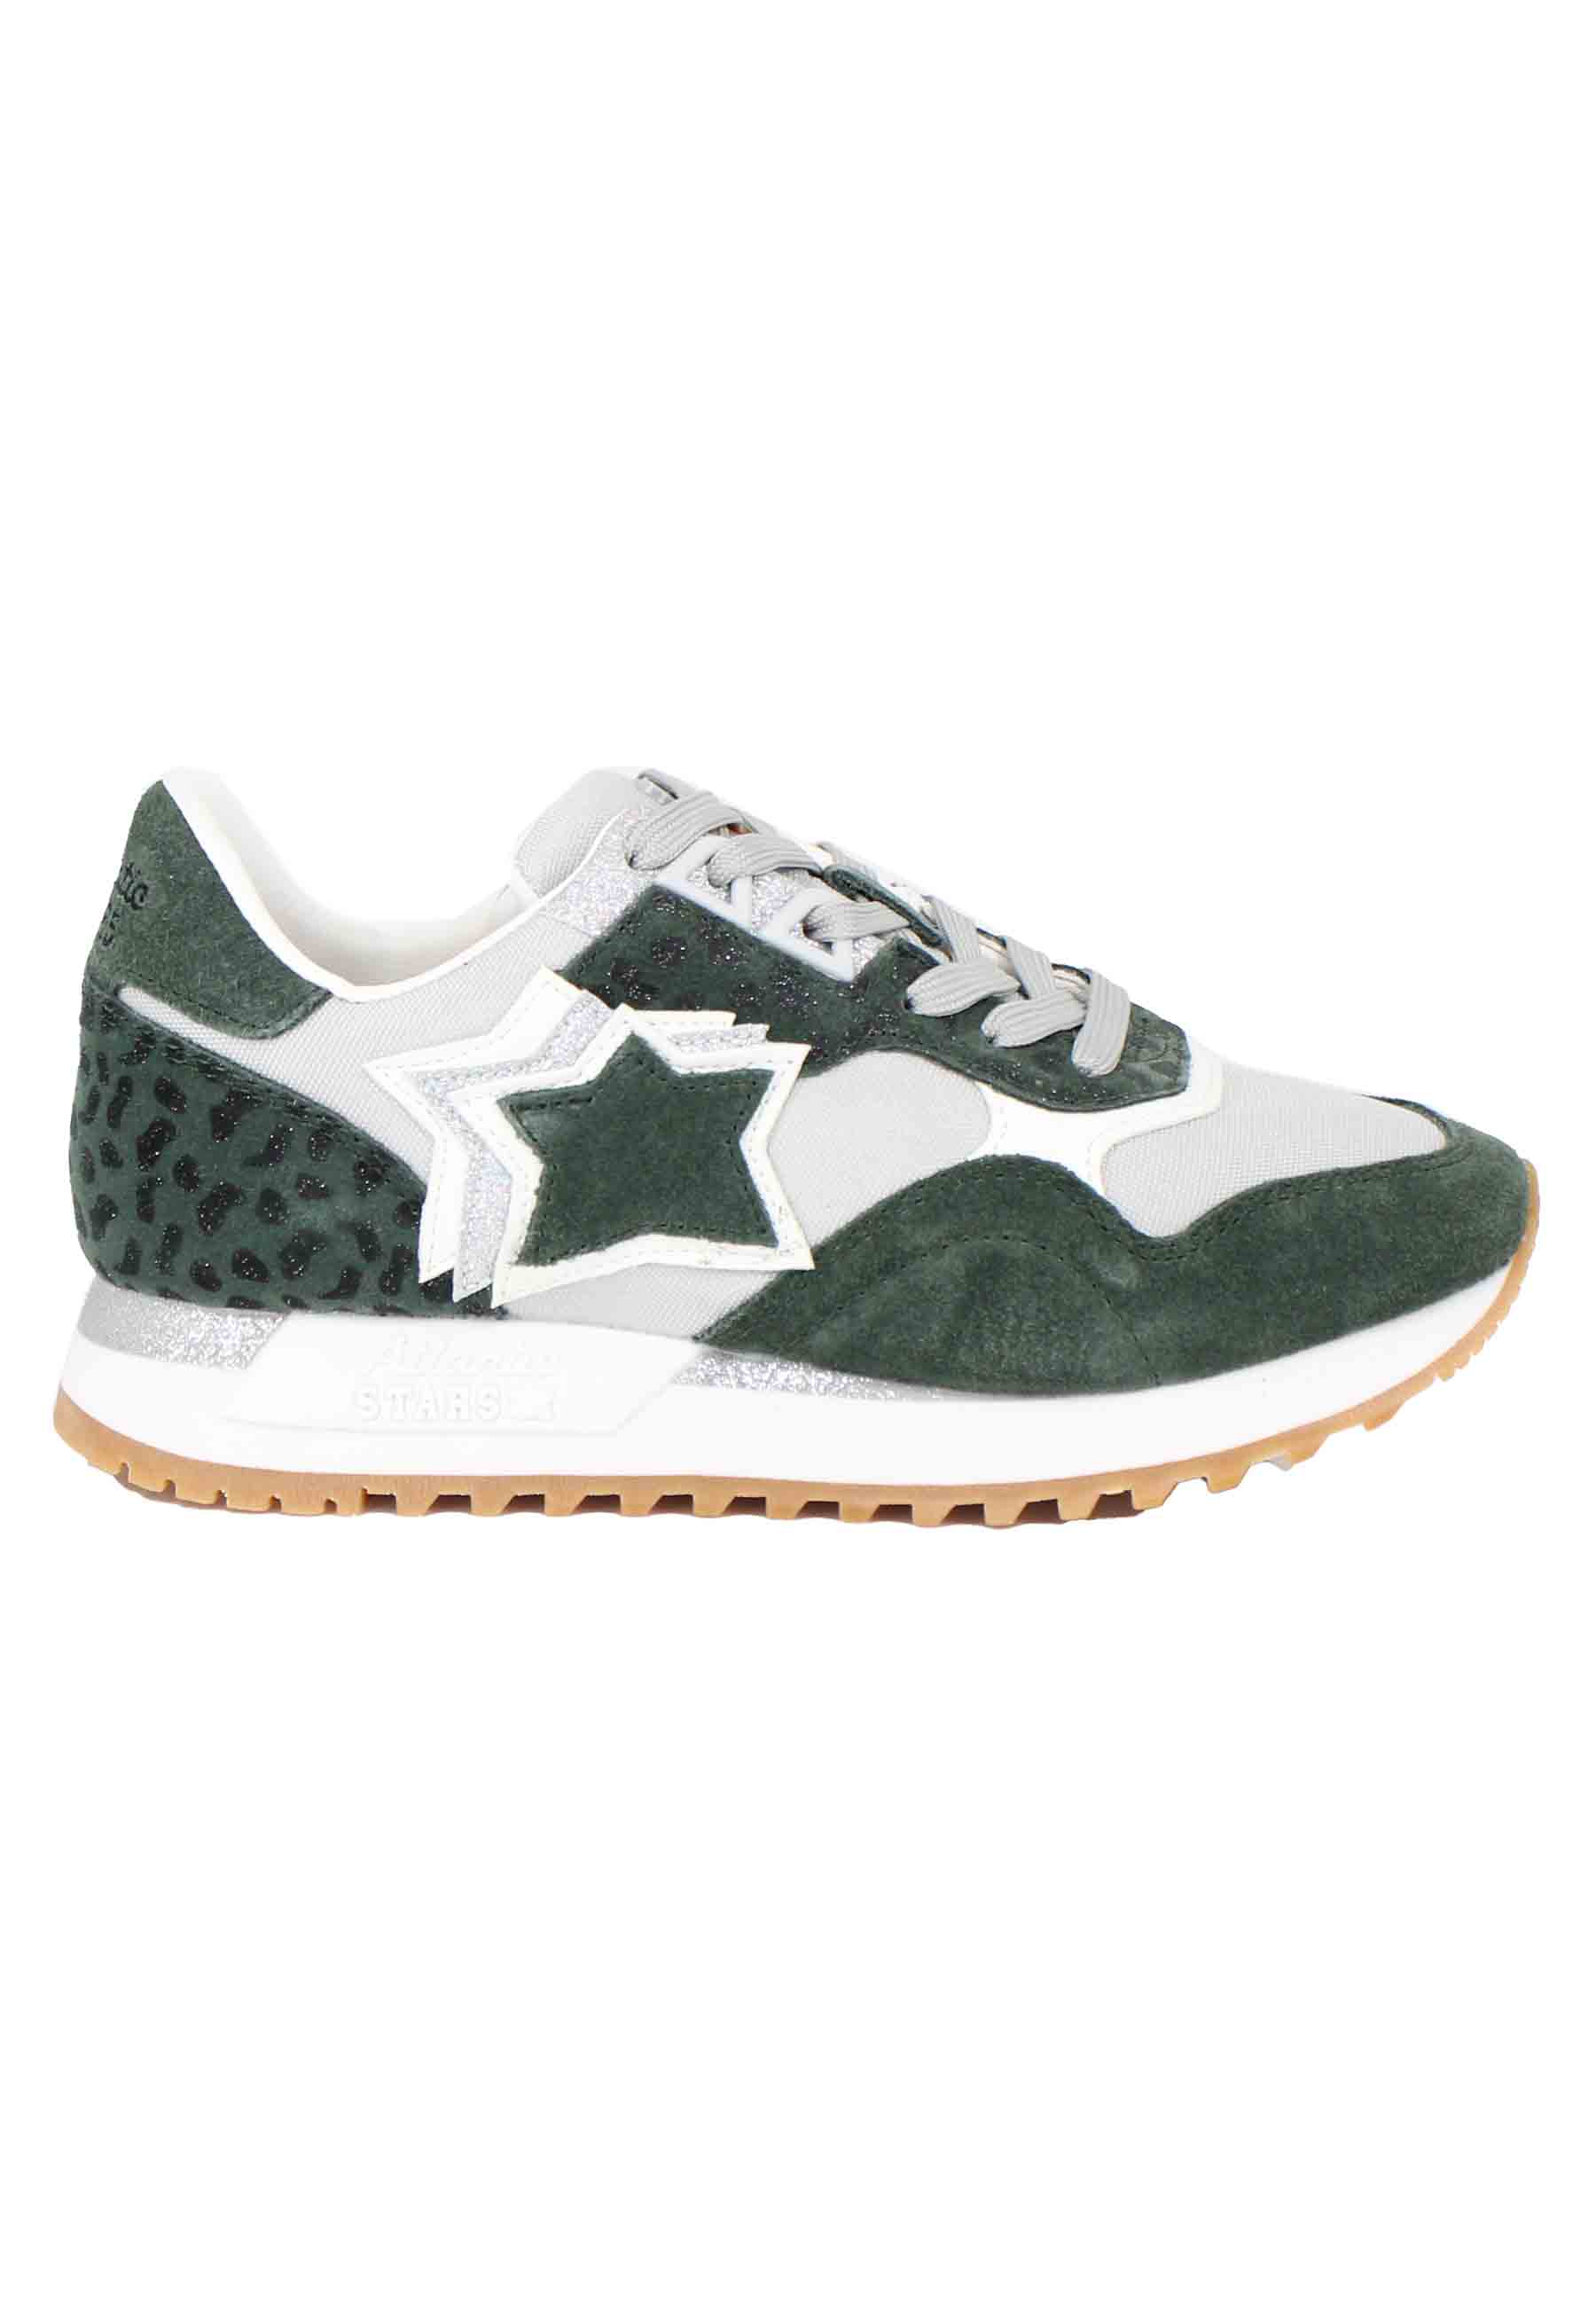 Sneakers Ghalac donna in pelle verde e tessuto animalier con stelle in tinta